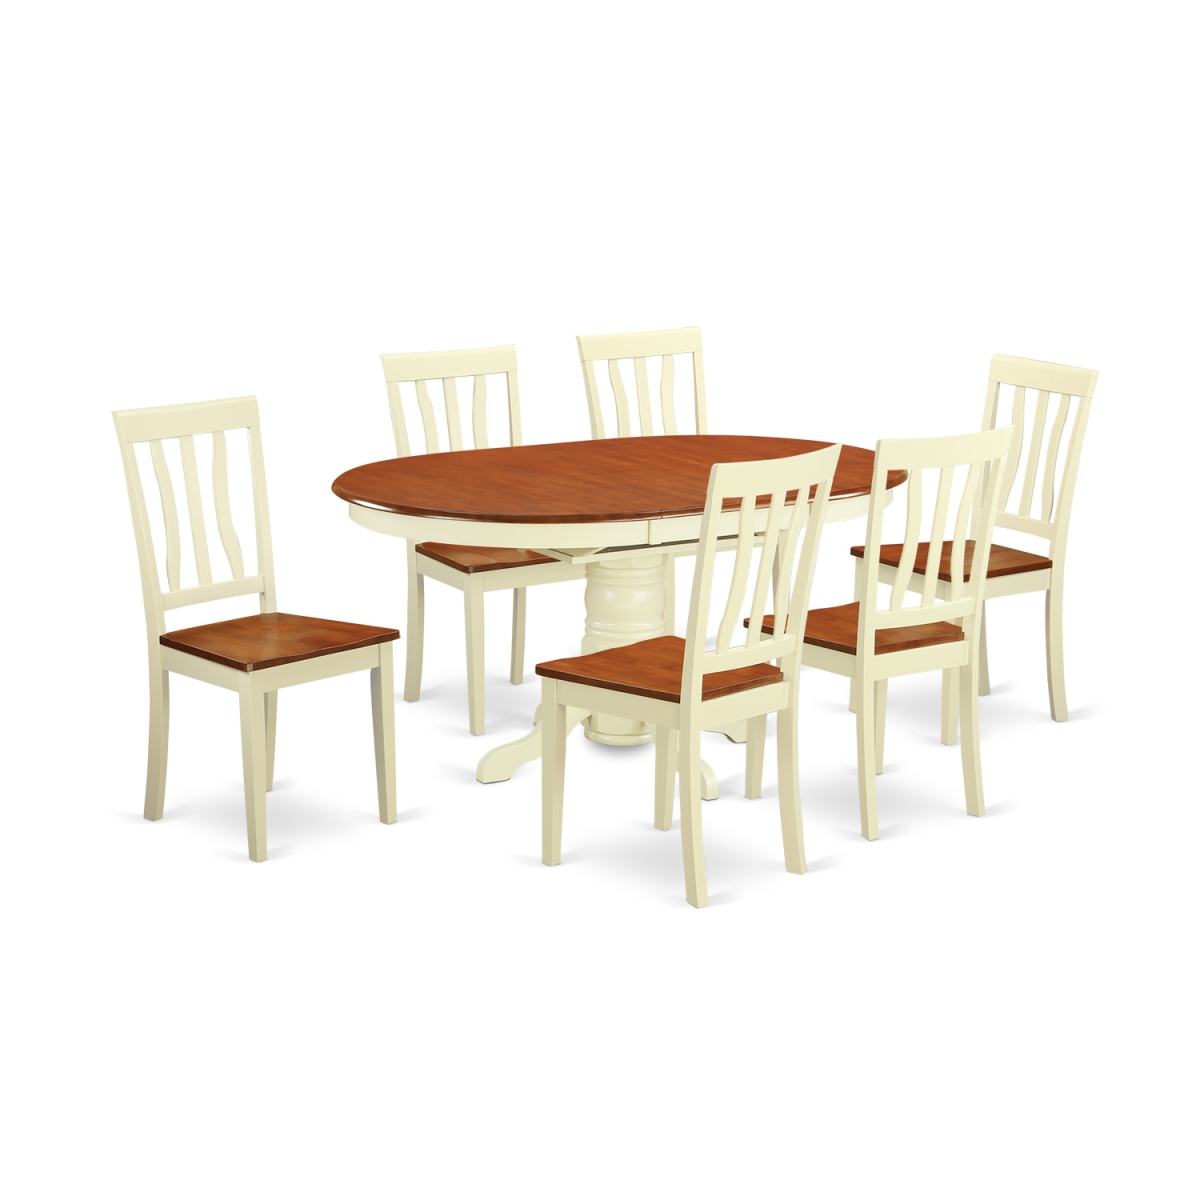 AVAT7-WHI-W Dining Set - Table & 6 Chairs, Buttermilk & Cherry - 7 Piece -  East West Furniture